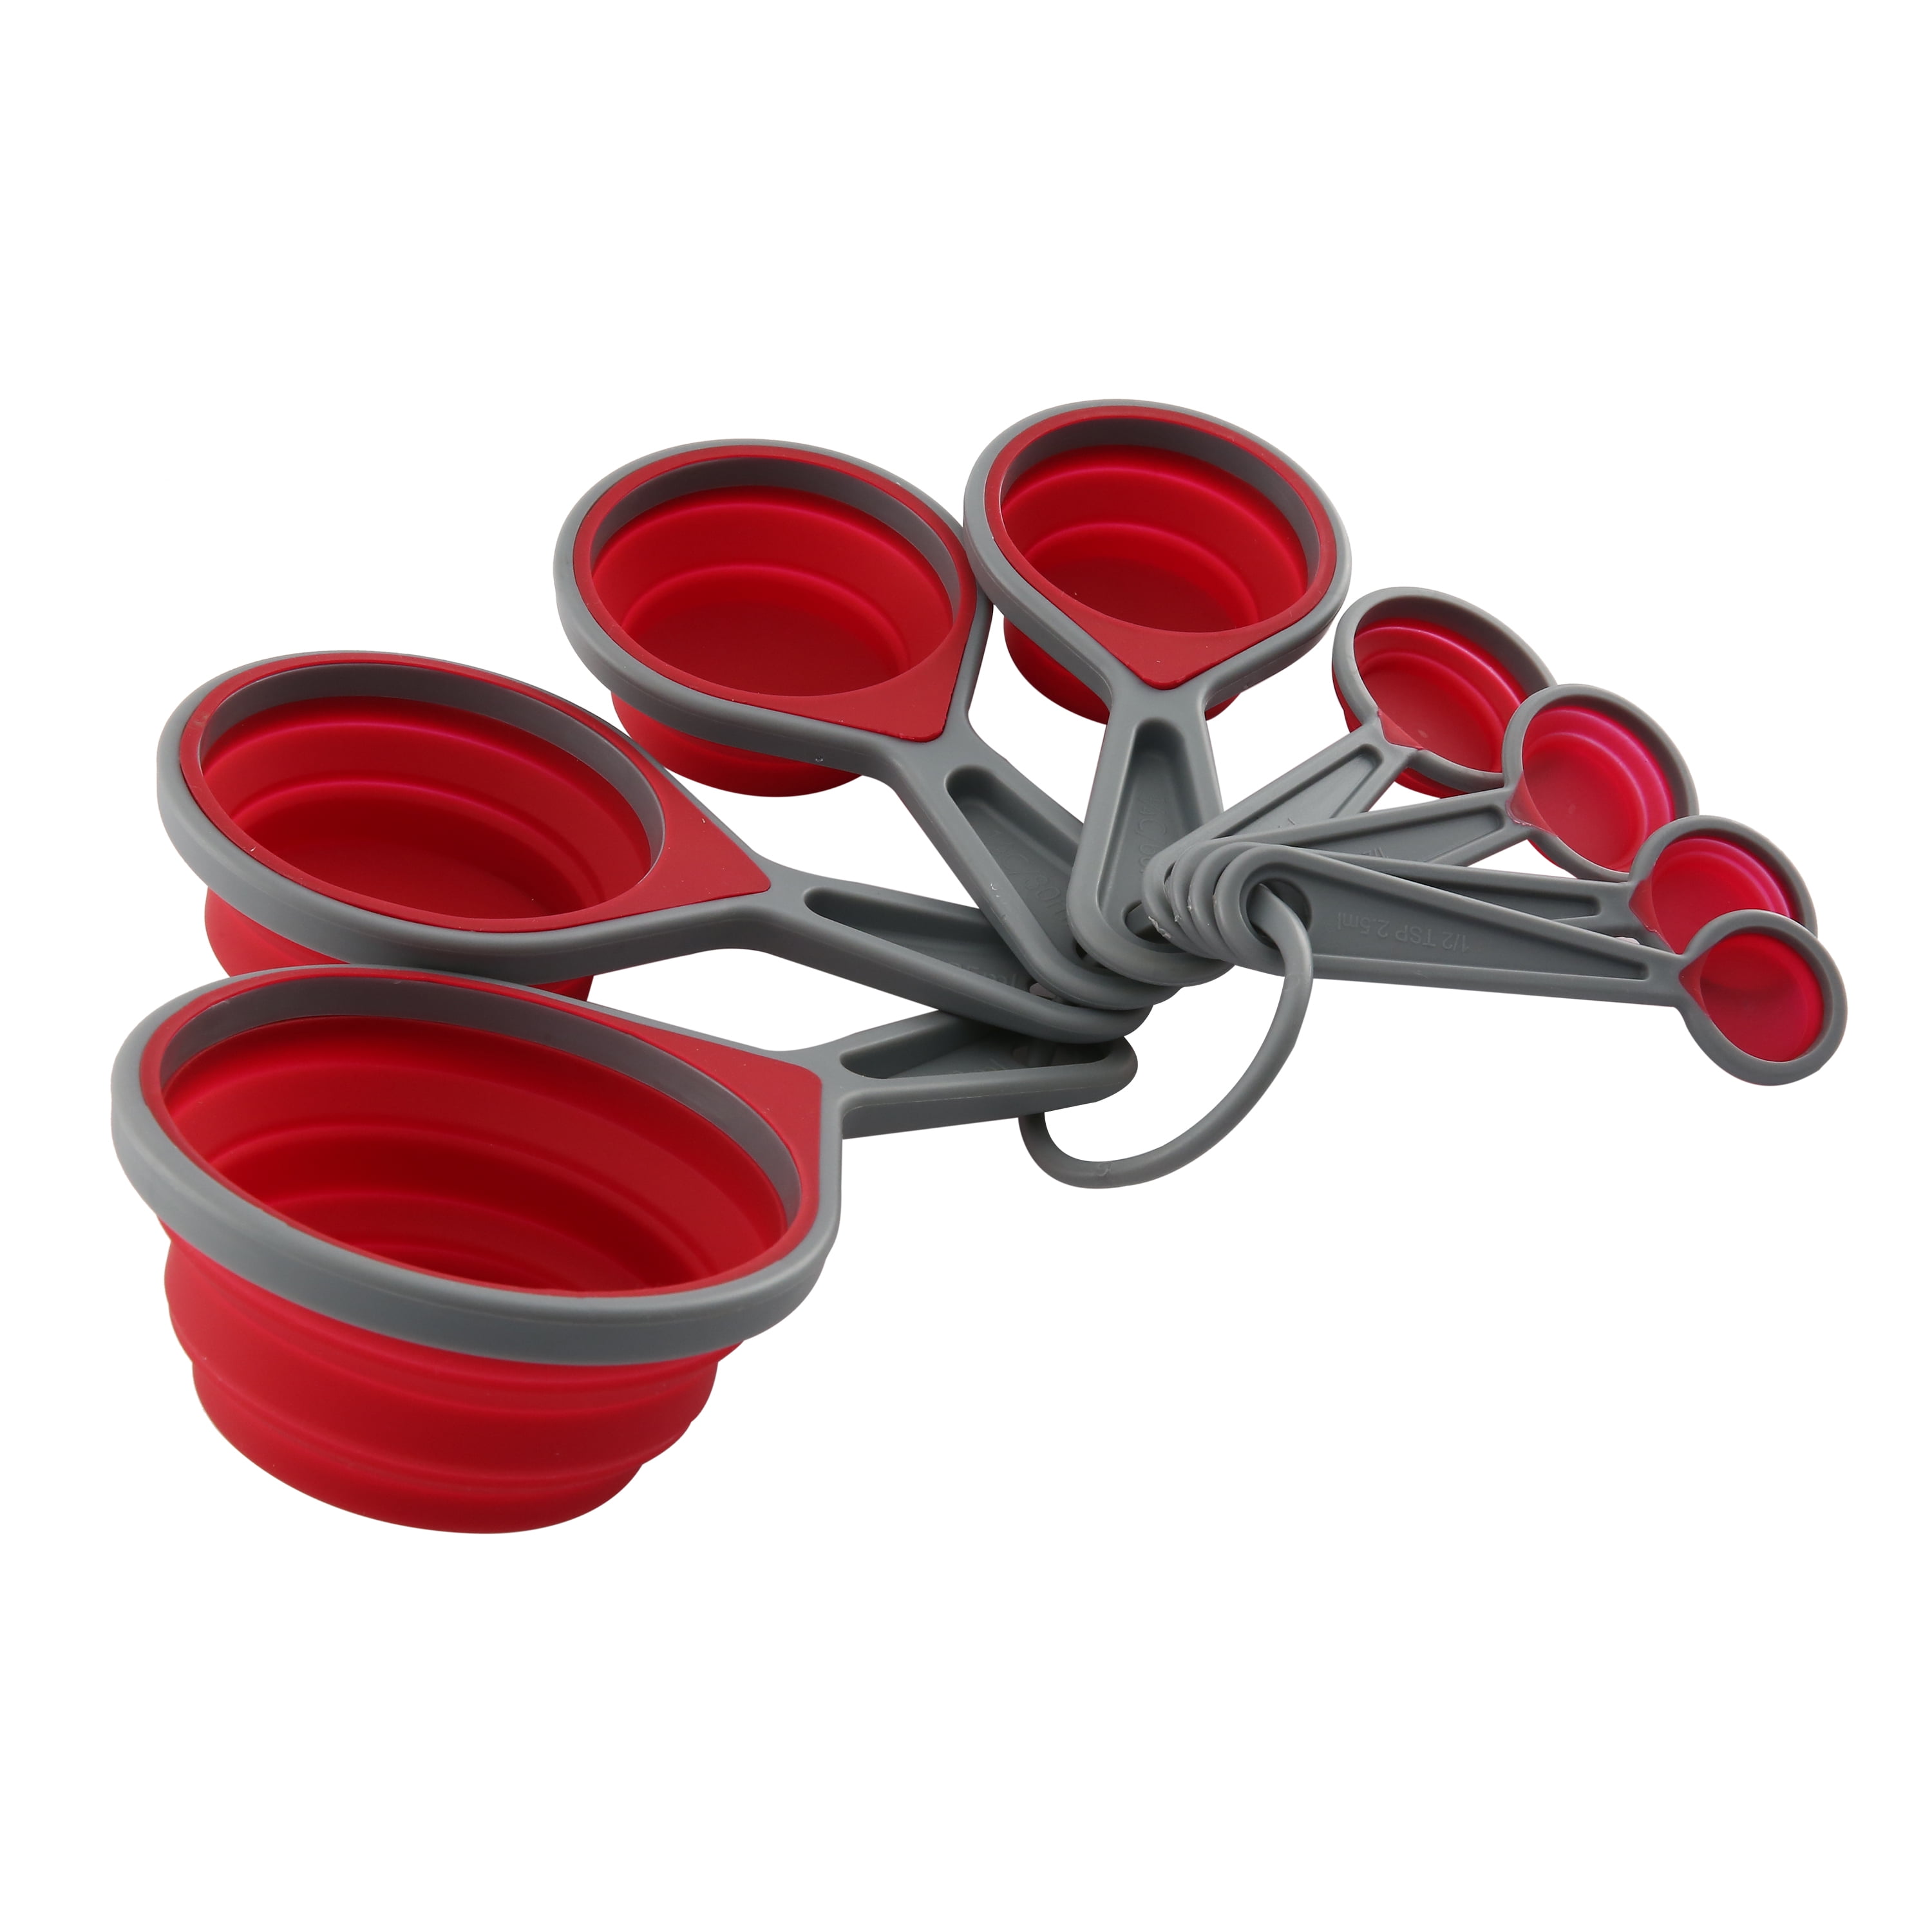 SKEMIX Collapsible Silicone Space Saving Measuring Cups & Measuring Spoons  8 Piece Set